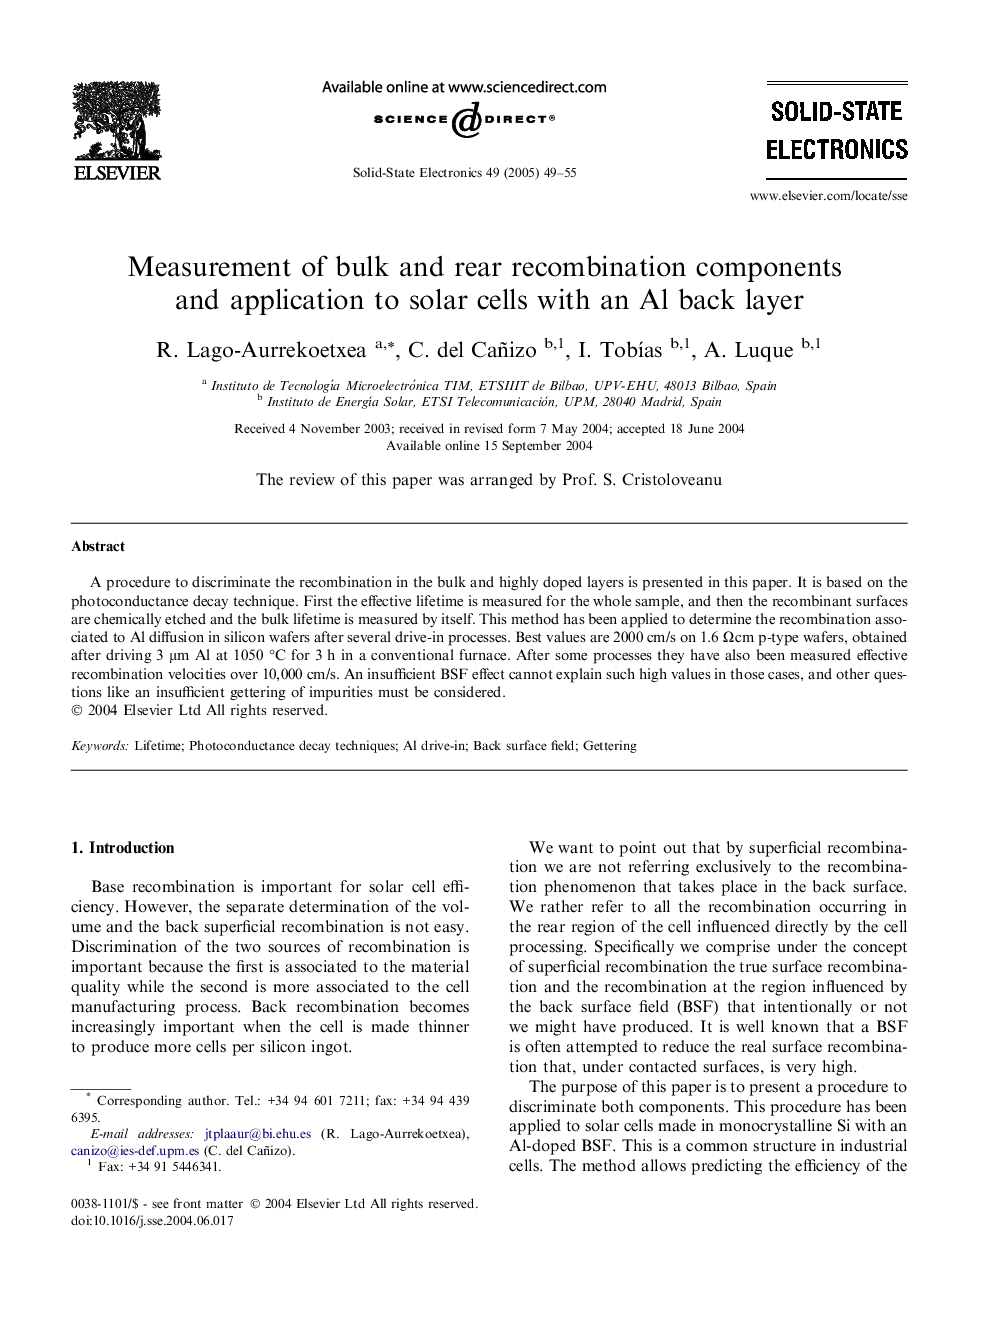 Measurement of bulk and rear recombination components and application to solar cells with an Al back layer